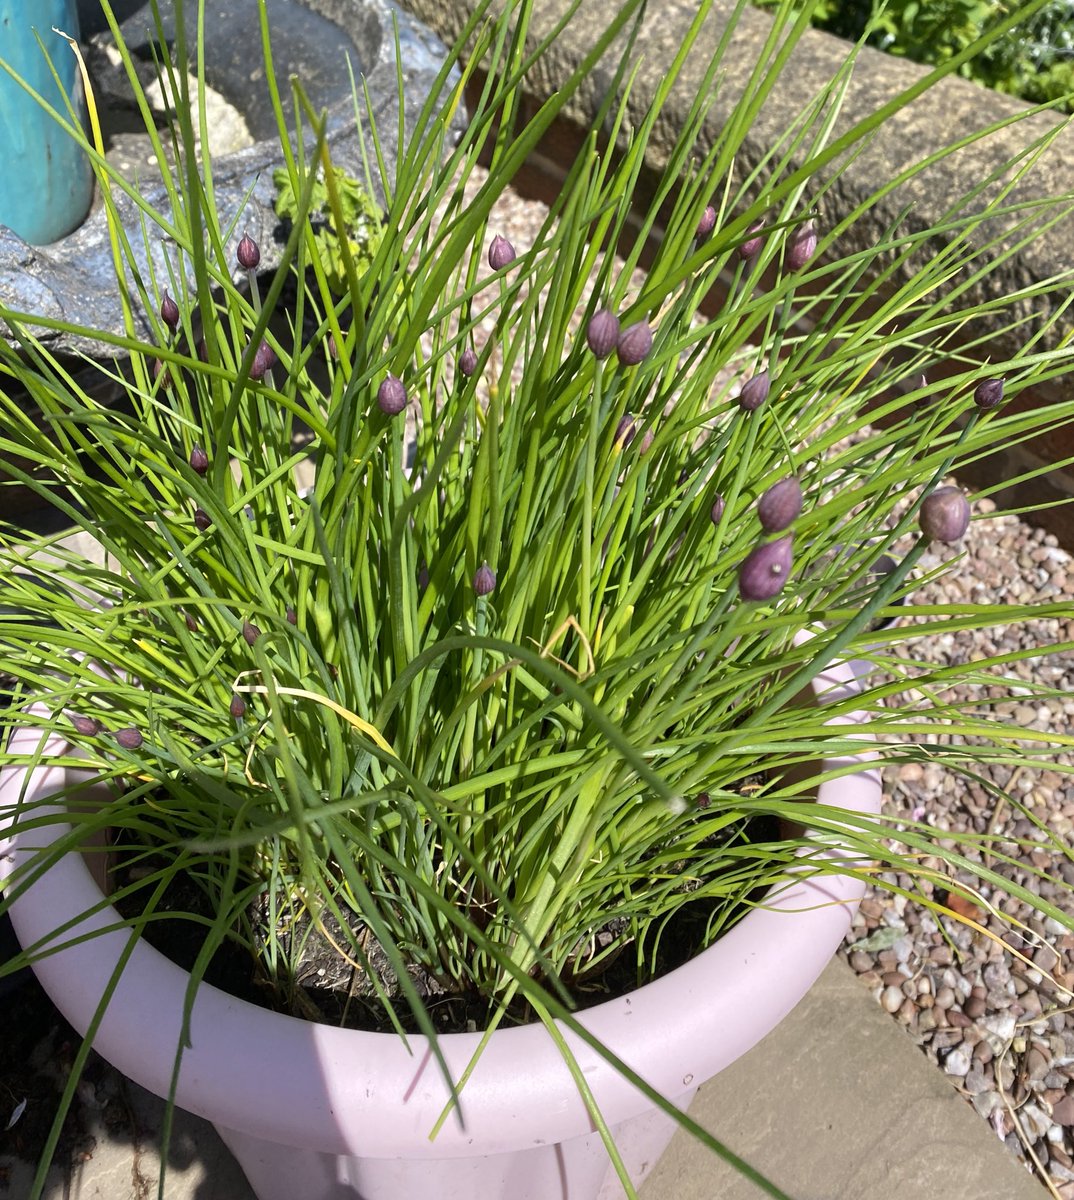 My chives are growing so well. They are going to have loads of gorgeous purple flowers